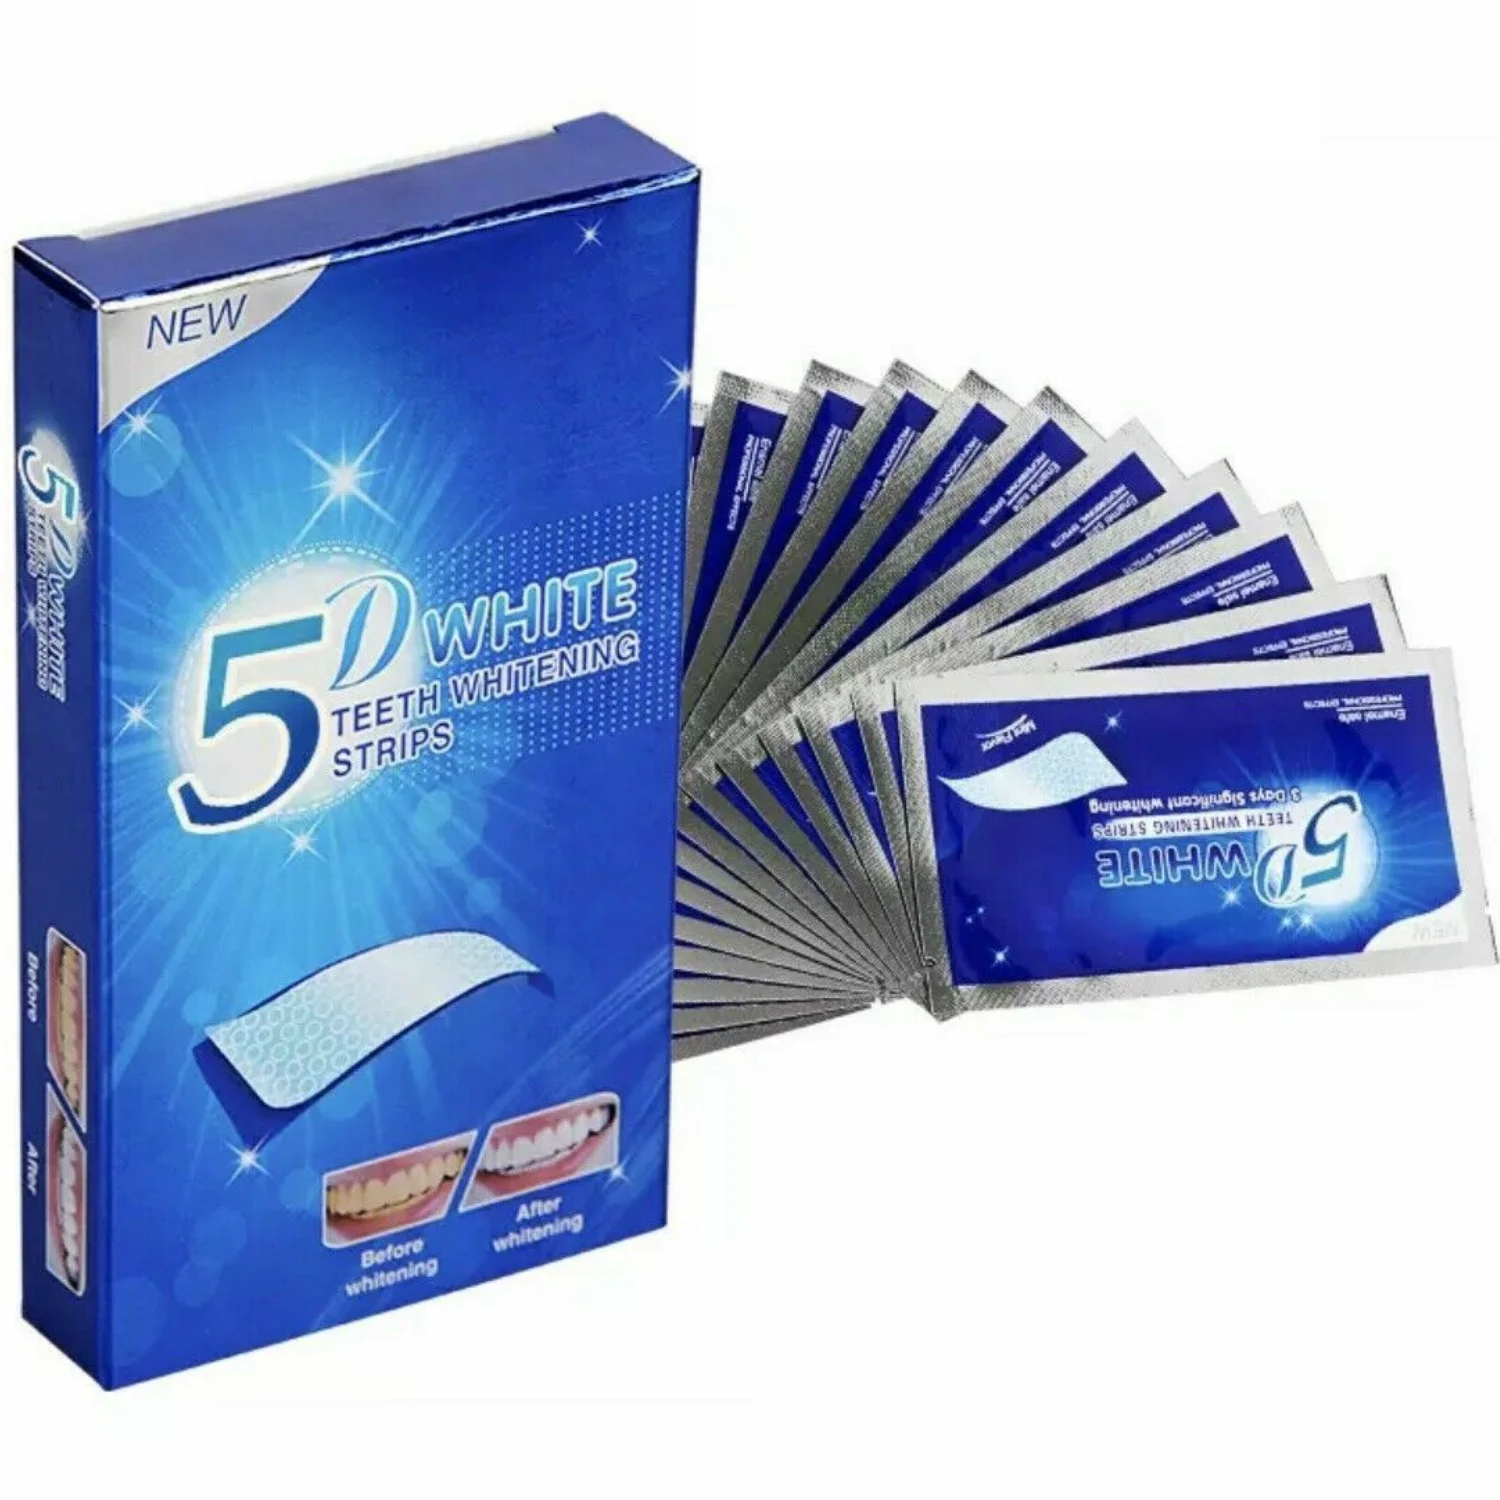 

5D Professional Teeth Whitening Safe Tooth Bleaching White Strips Kit 7 Pouches